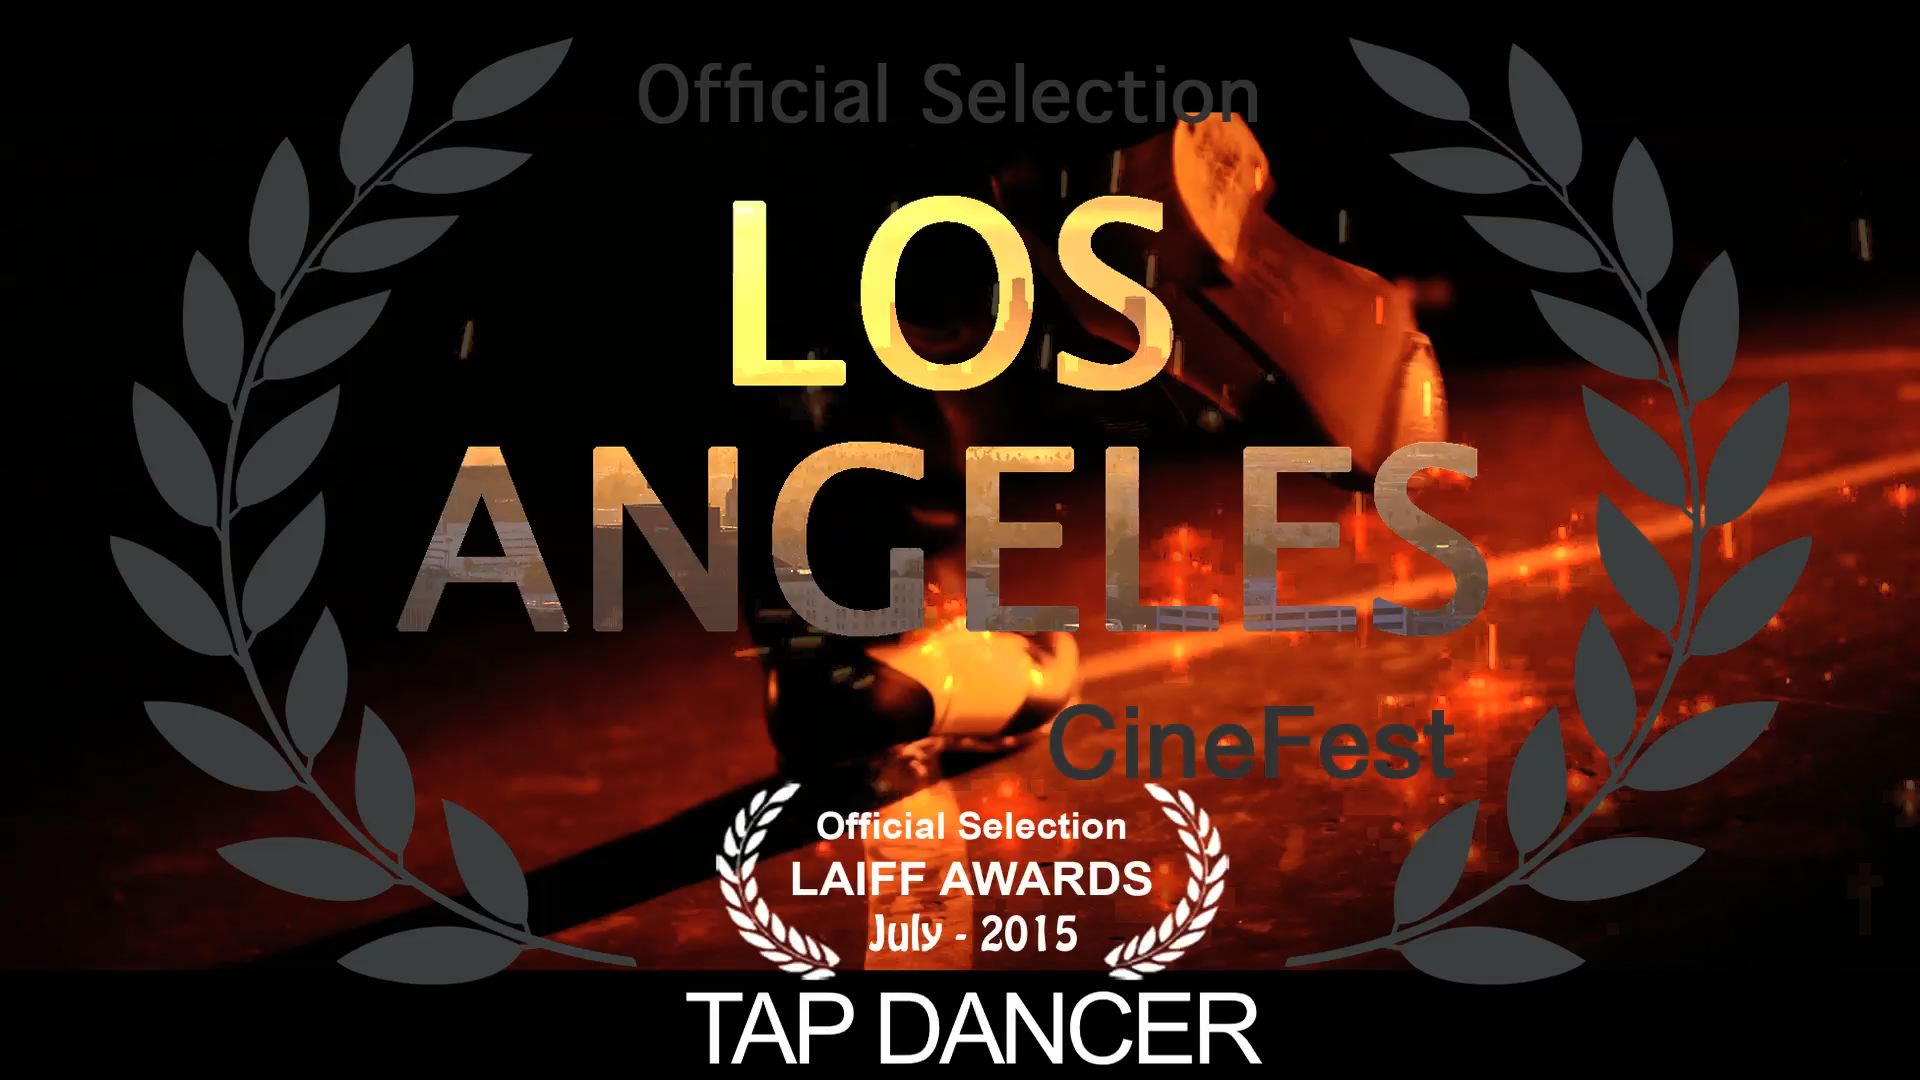 Tap Dancer, Official Selections